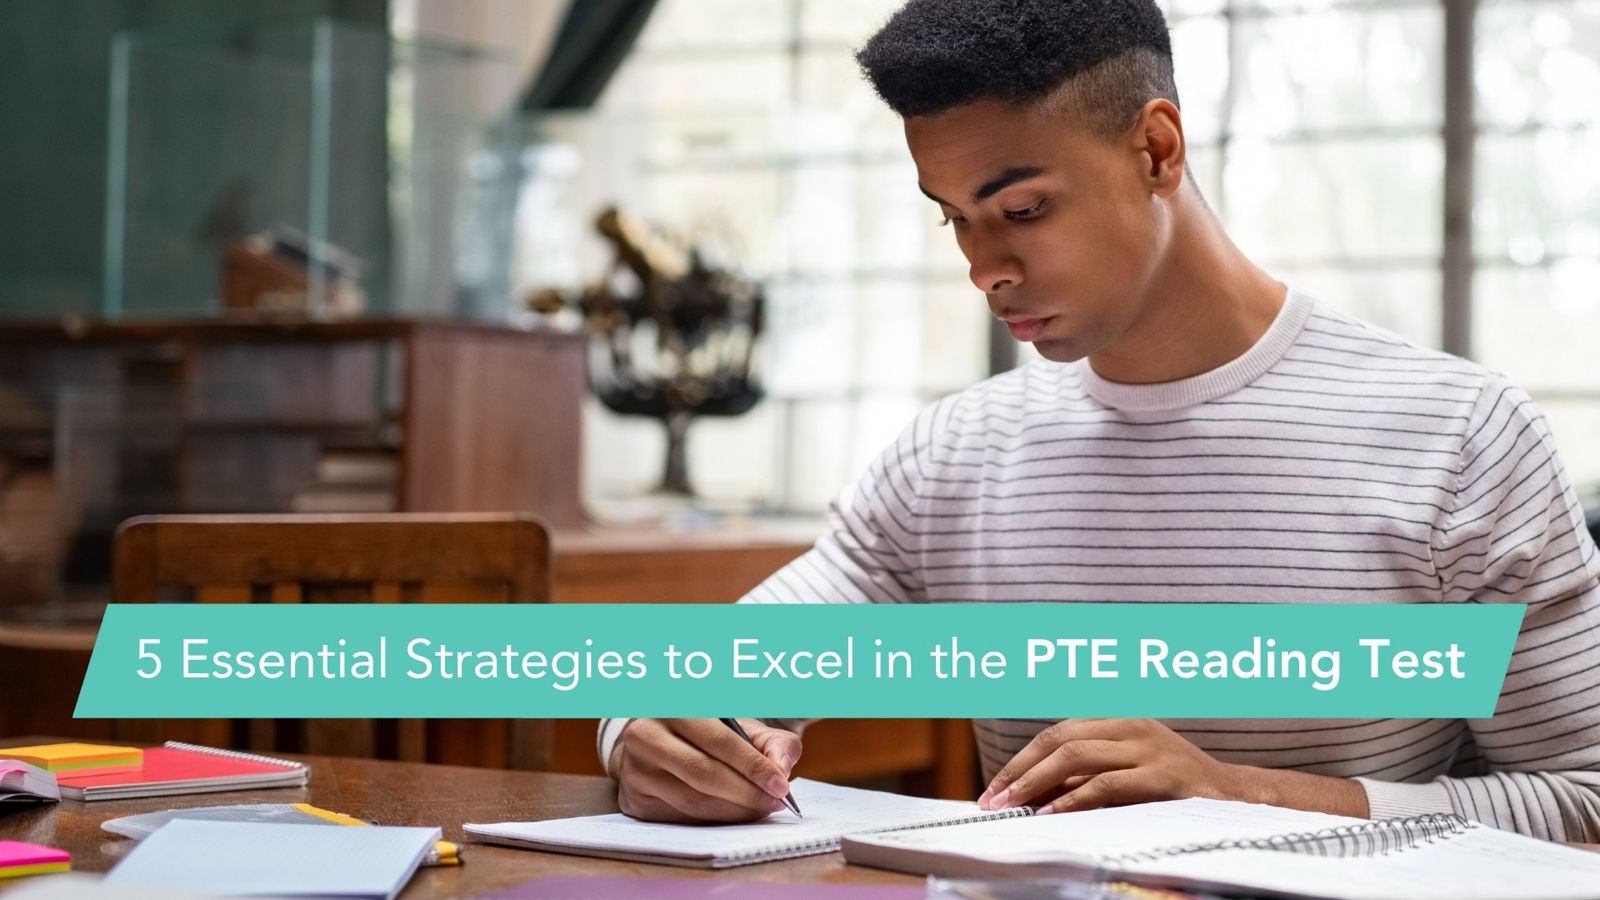 Boy writing and 5 Essential Strategies to Excel in the PTE Reading Test written in the front